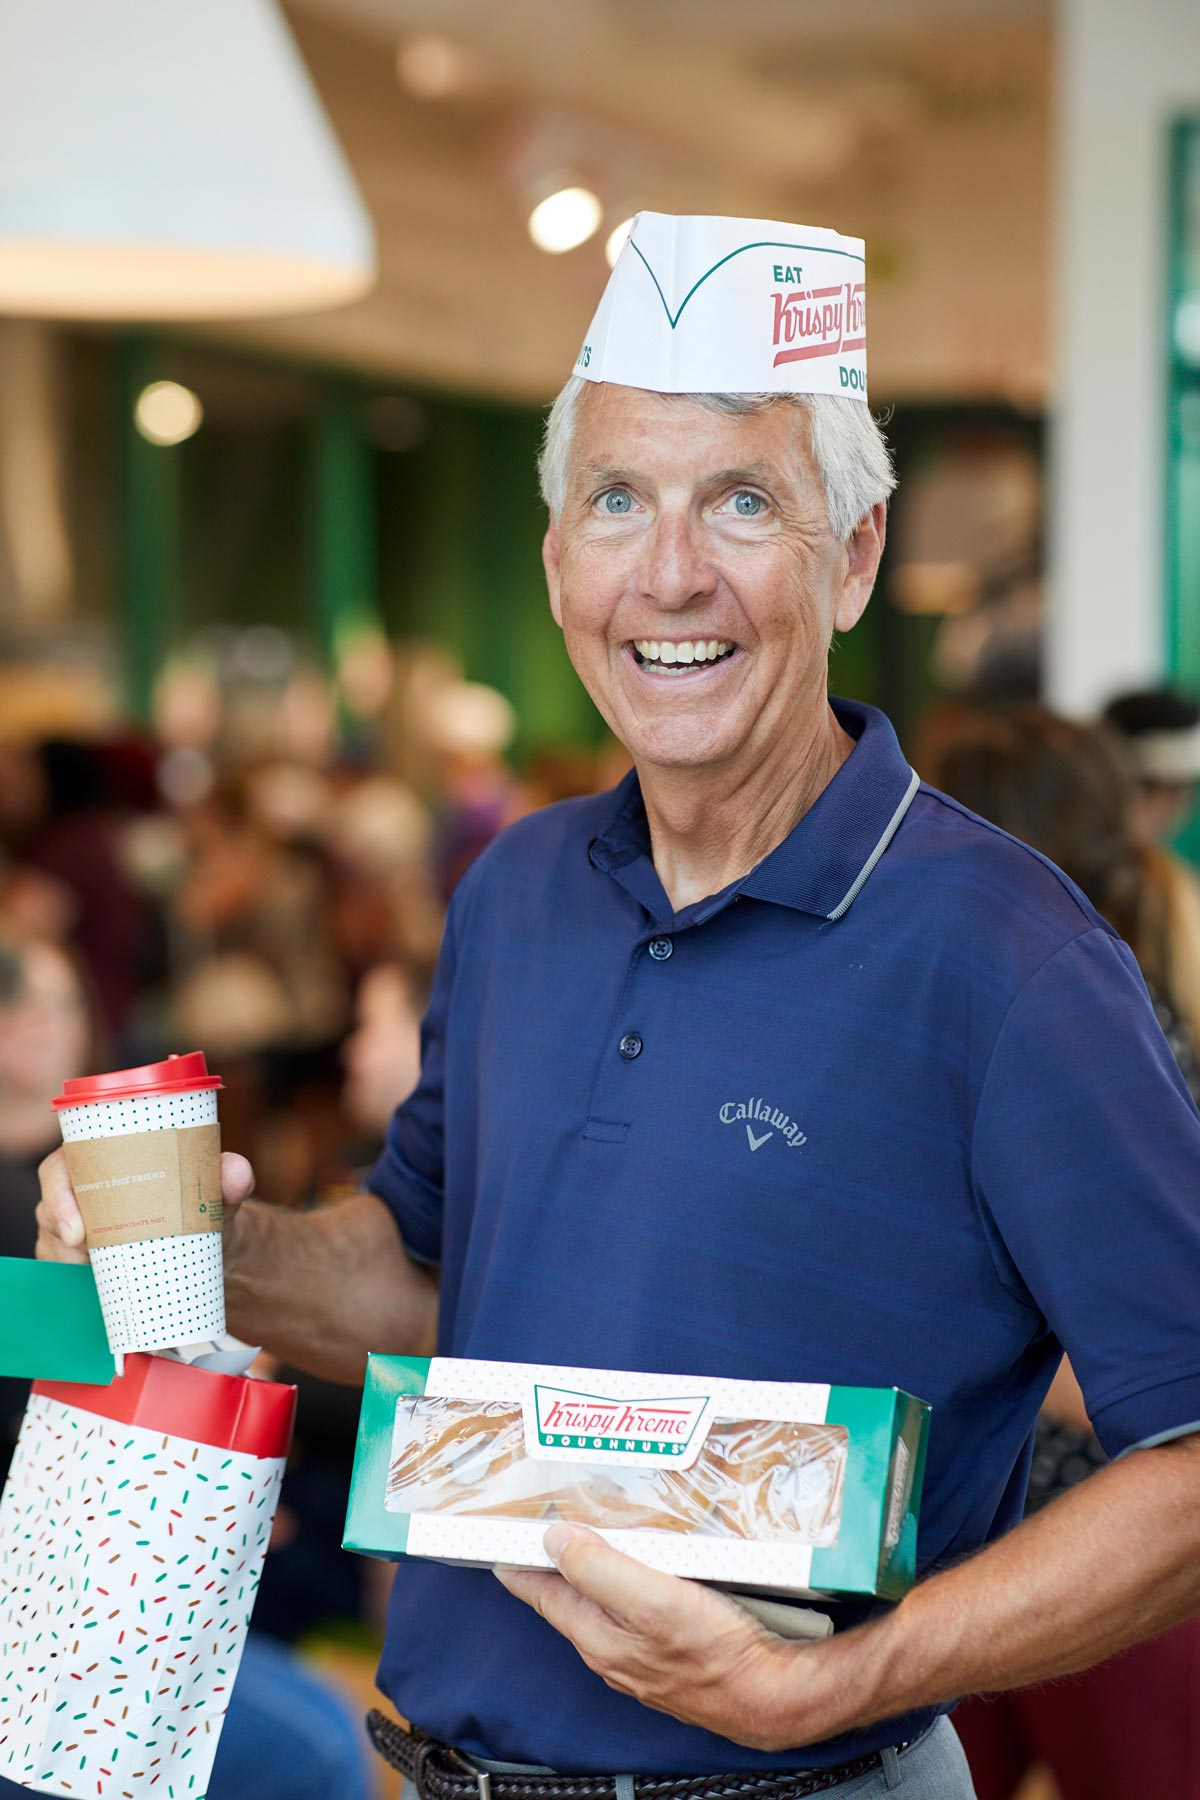 Older man with white hair wearing a Krispy Kreme paper had and holding a package of doughnuts and a coffee